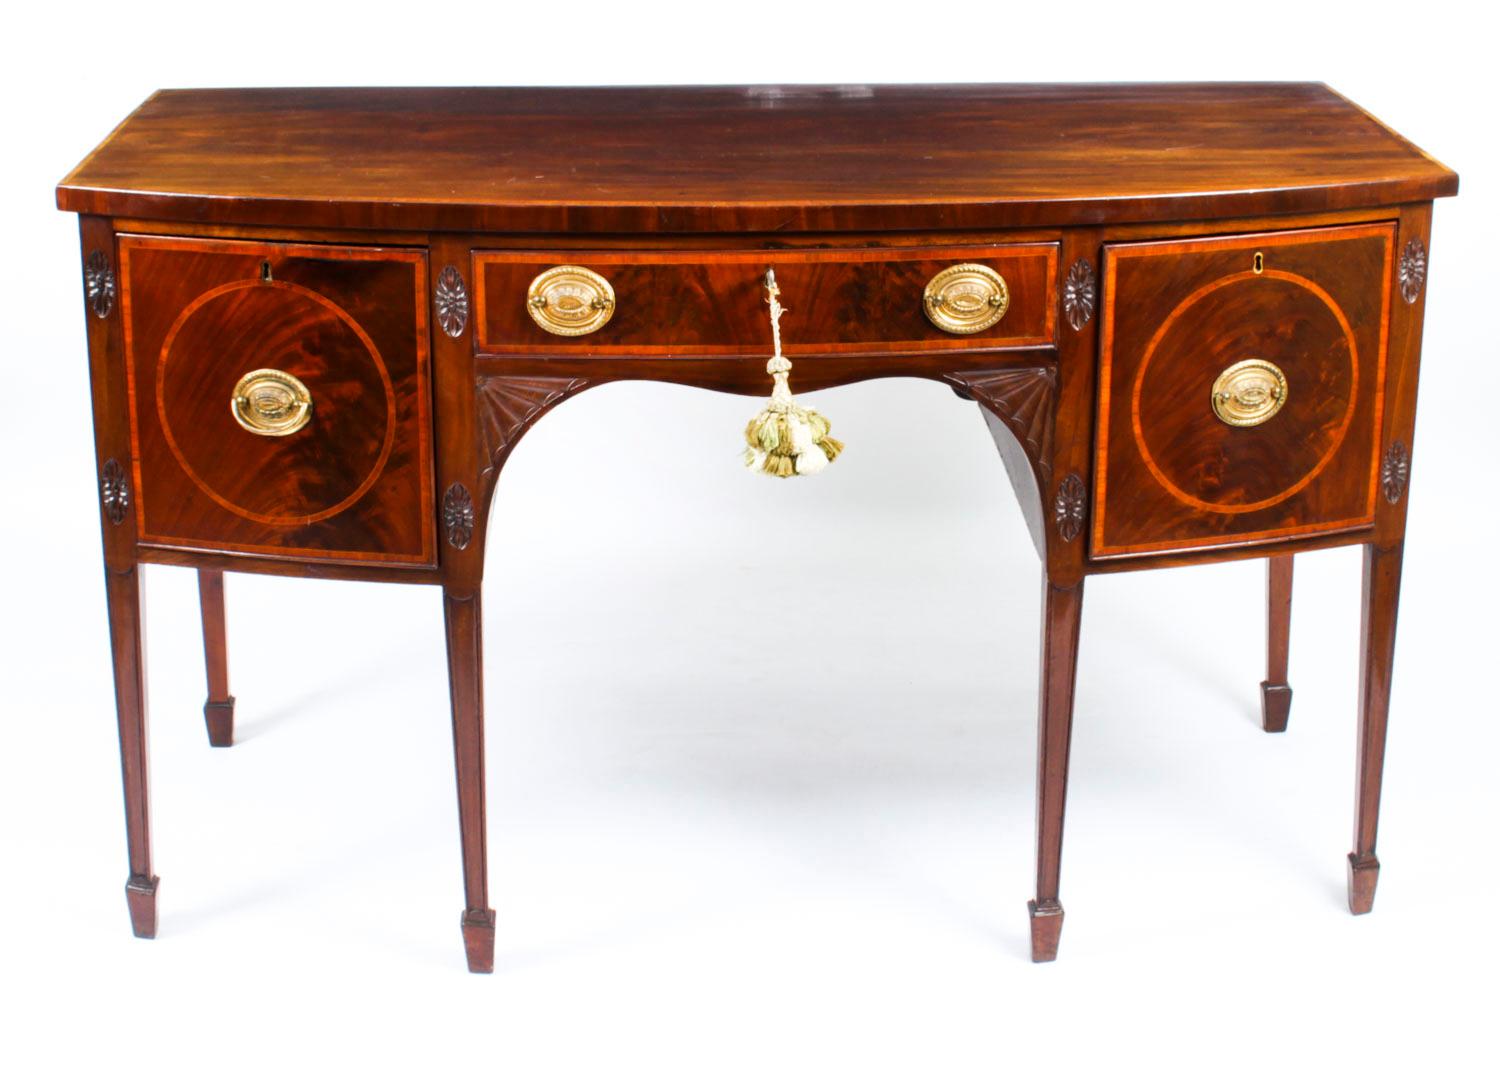 This is a superb antique George III inlaid flame mahogany bowfront sideboard, circa 1780 in date.

The top is banded in satinwood and the sideboard has three oak lined frieze drawers decorated with satinwood banding and oval brass handles.

It is